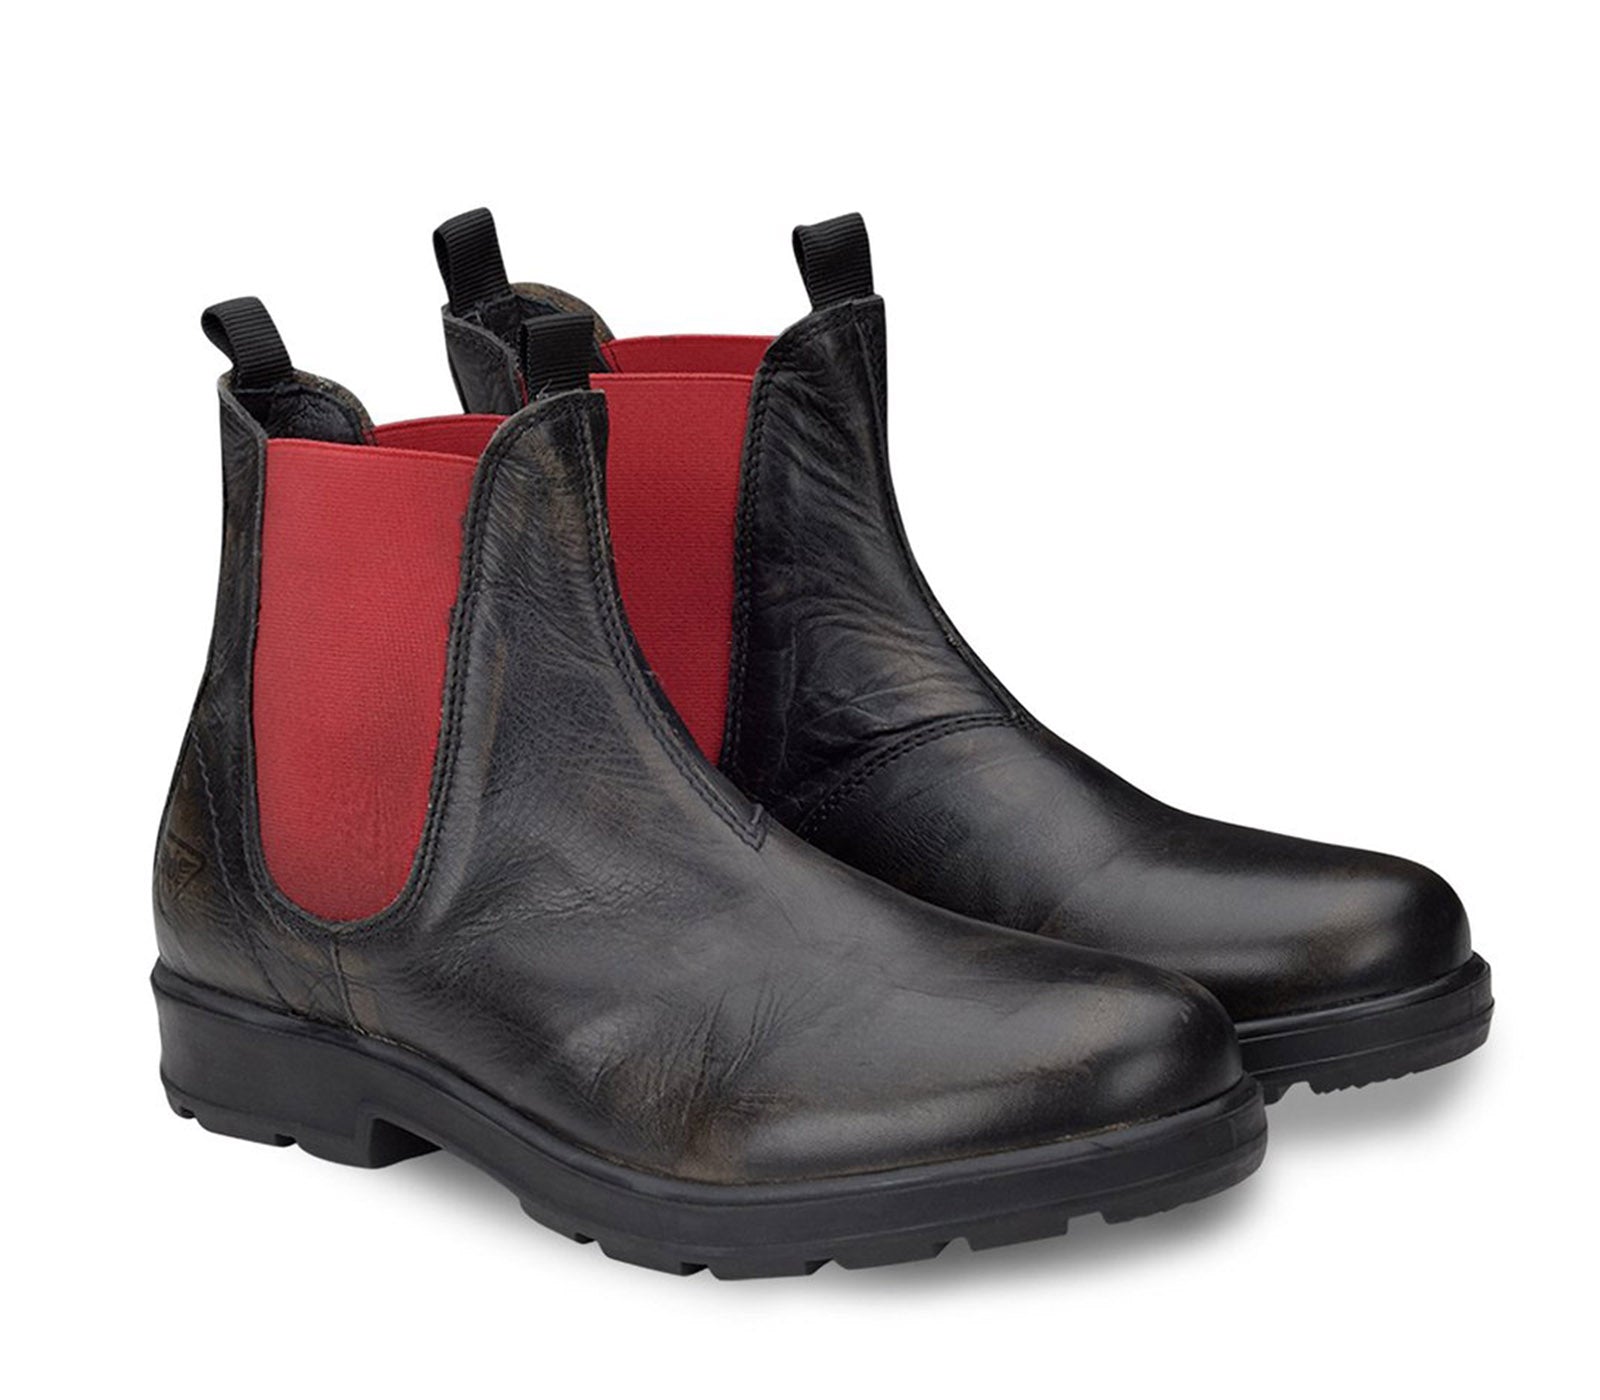 Men's Black Leather Chelsea Boots with Red Elasticized Inserts